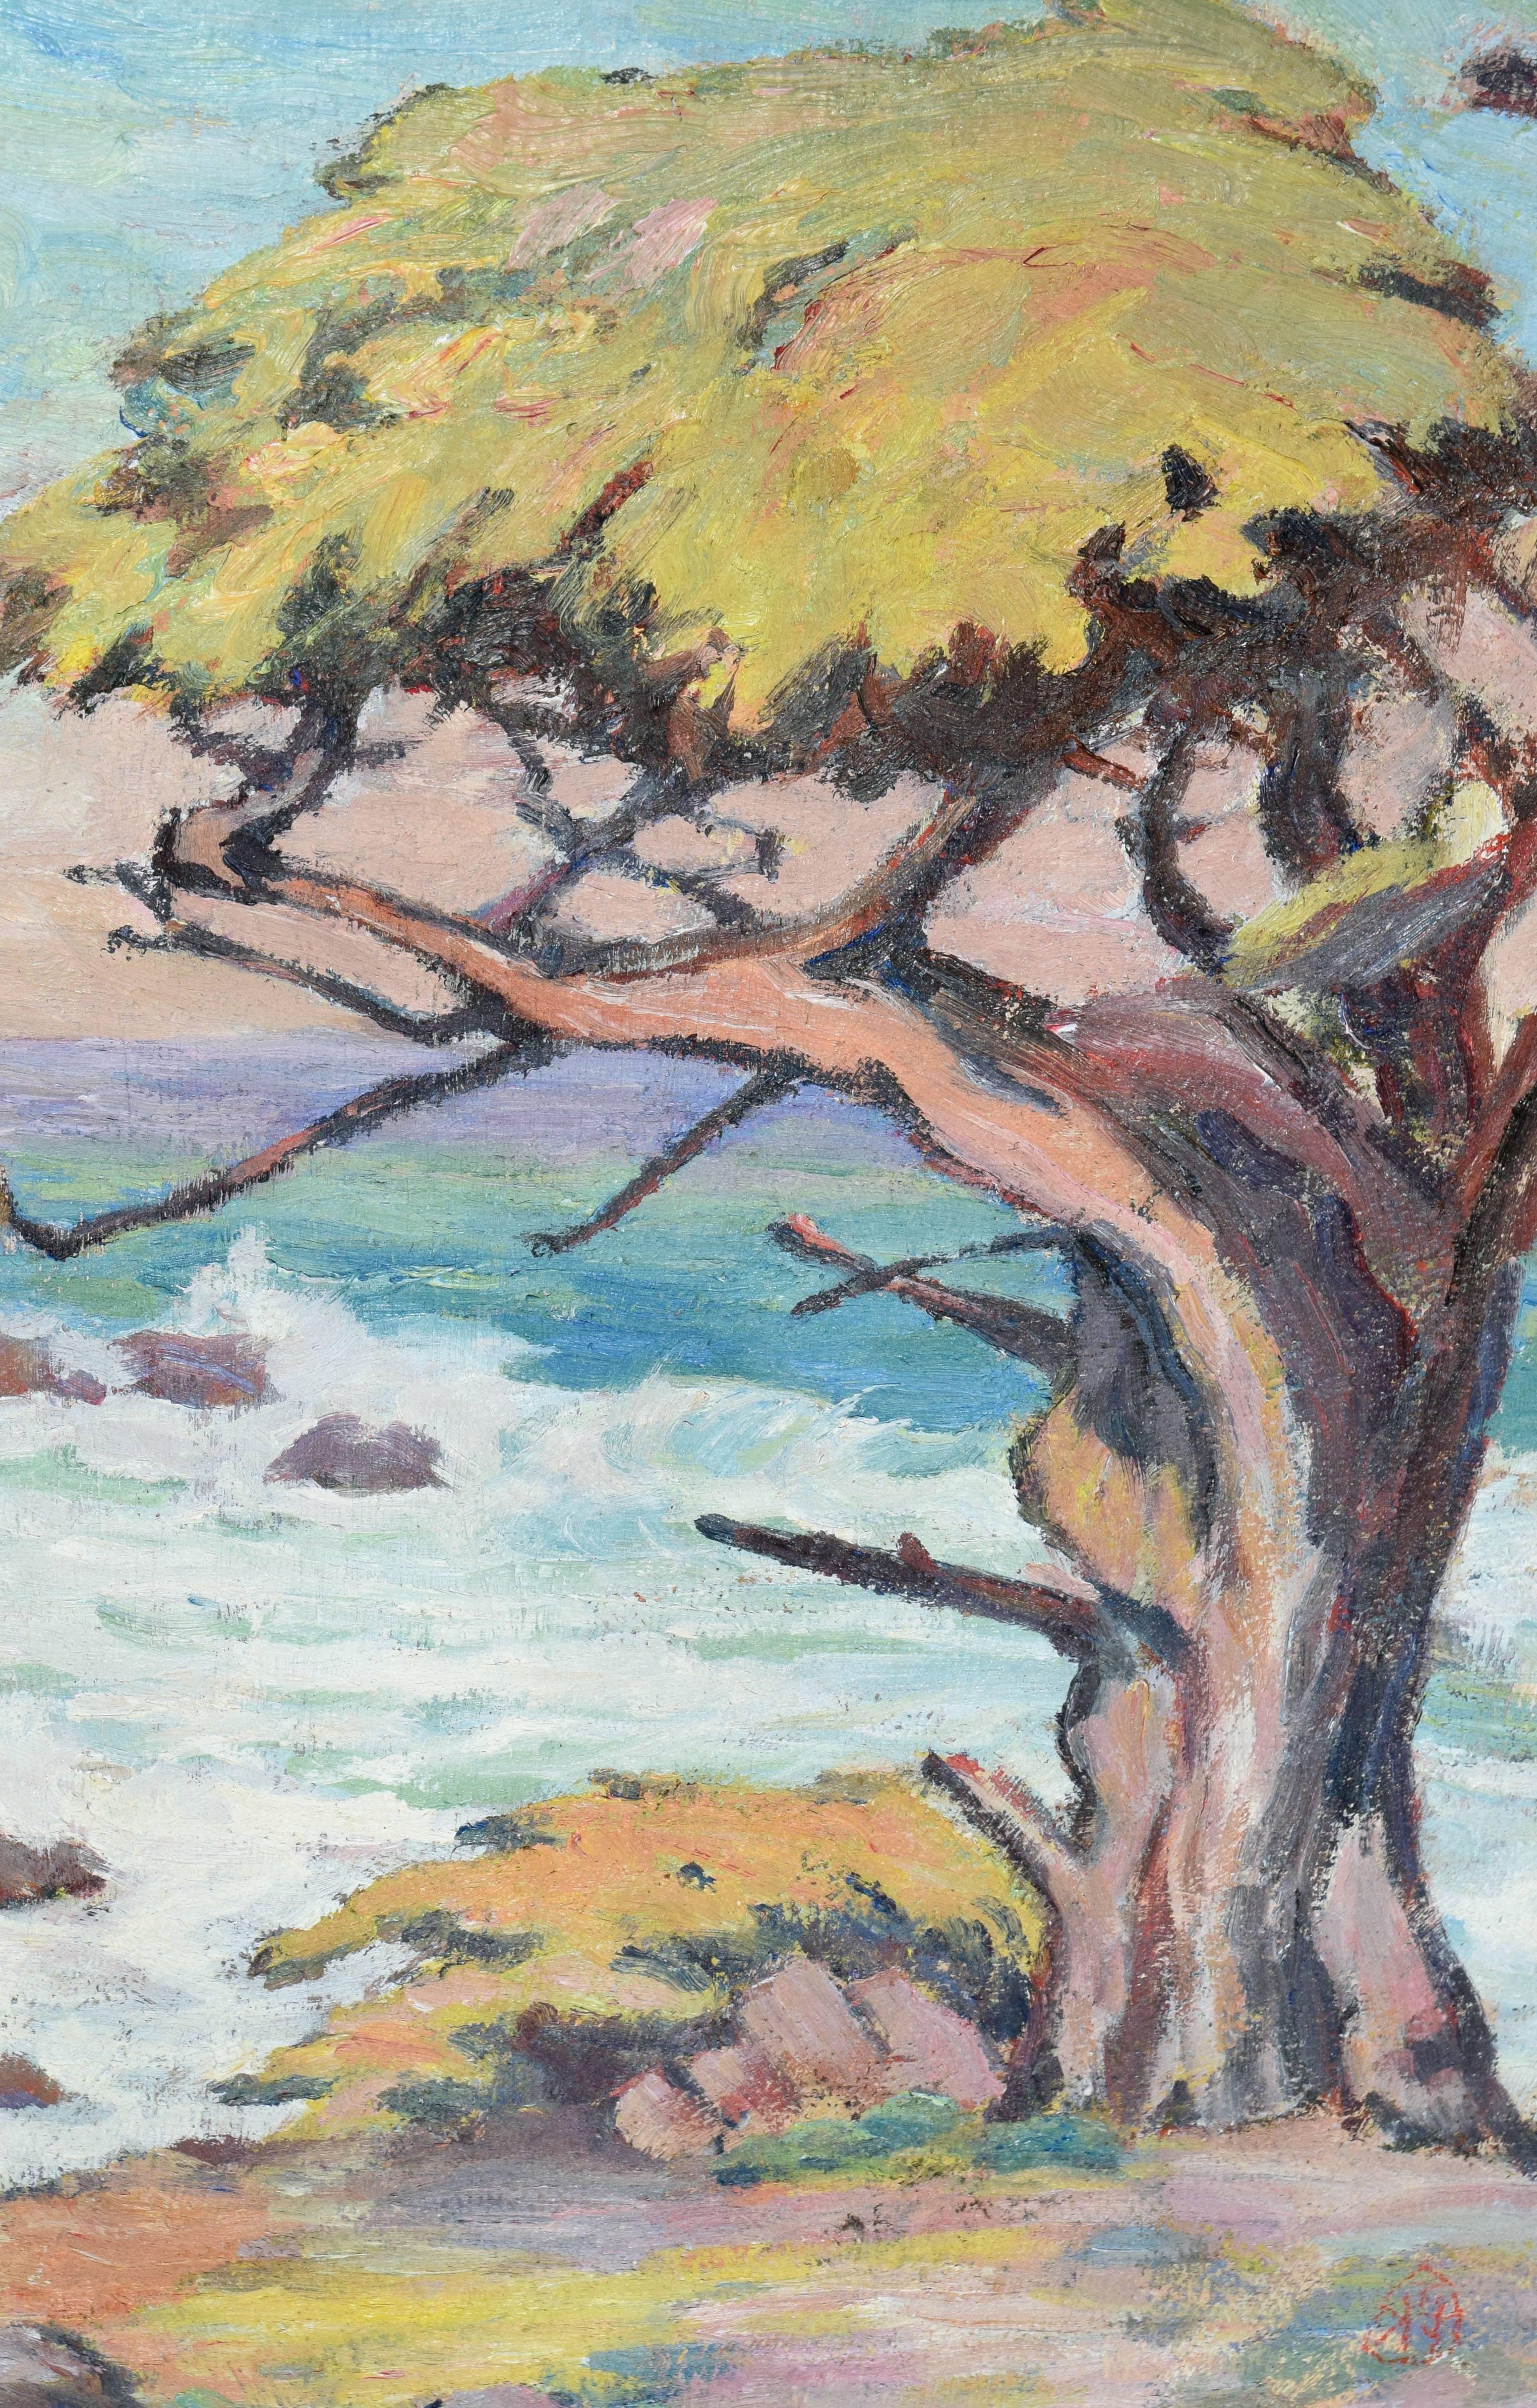 Carmel Cypress Seascape - American Impressionist Painting by Unknown